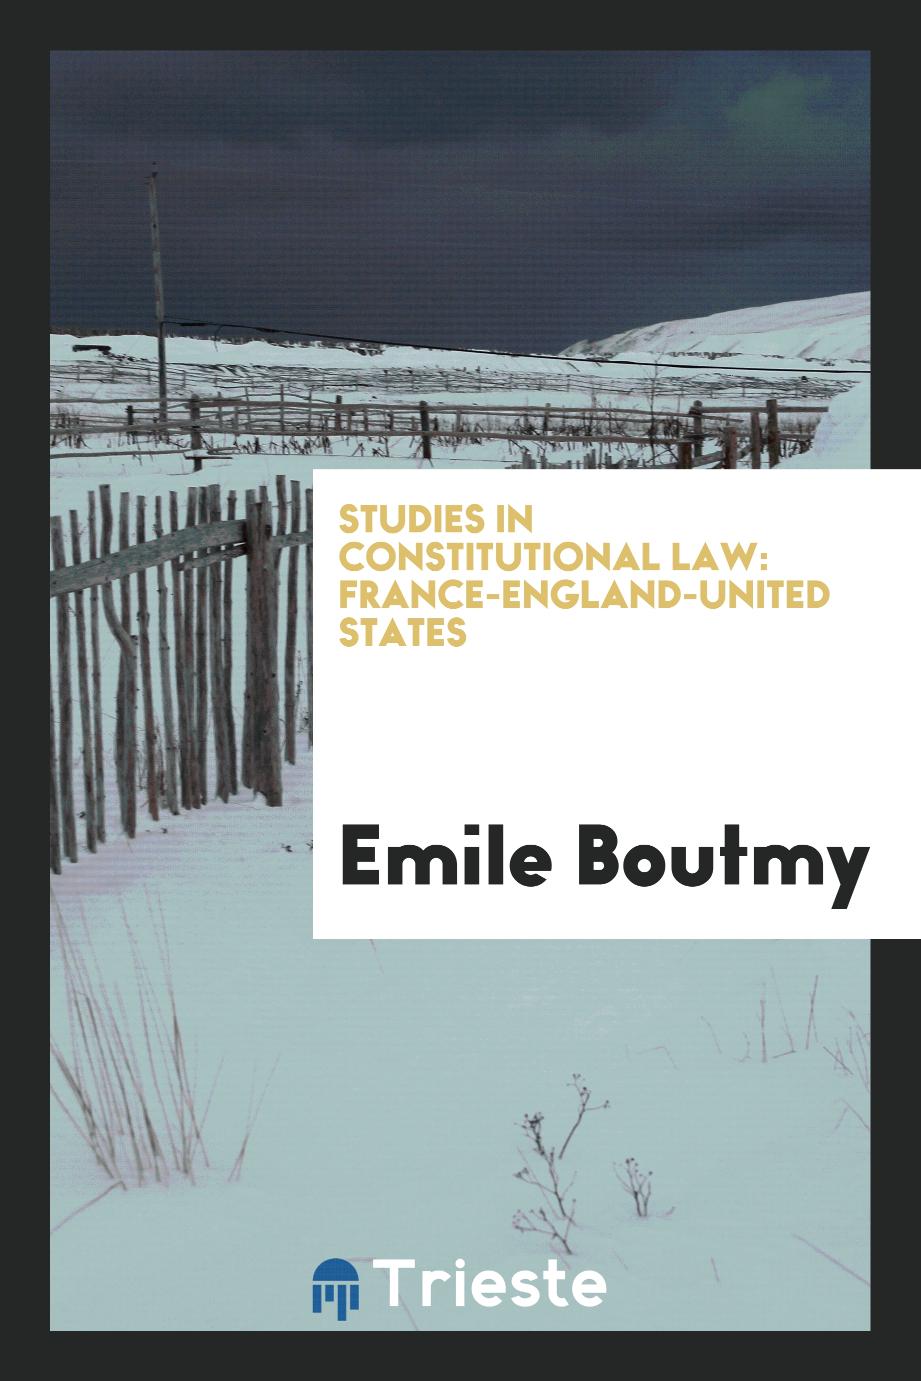 Studies in constitutional law: France-England-United States